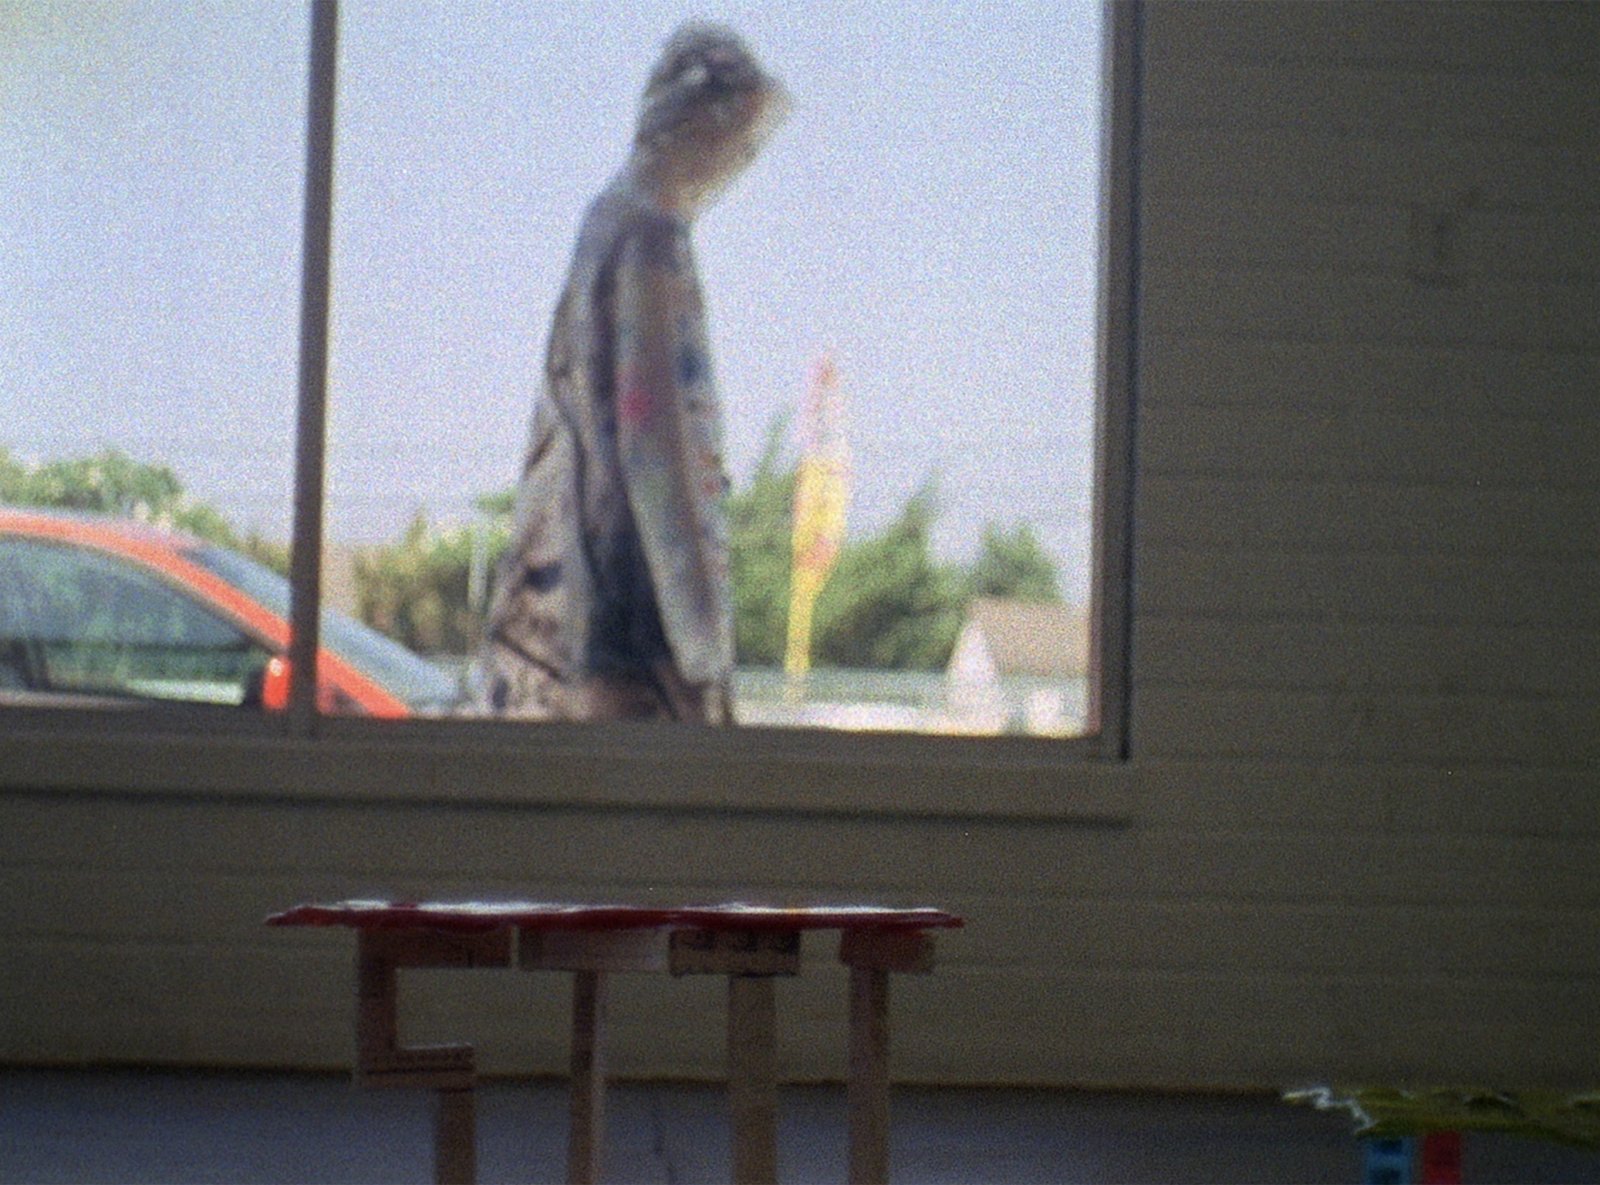 Julia Feyrer, New Pedestrians (still), 2018, 16mm film transferred to digital with sound, 4 minutes by Julia Feyrer